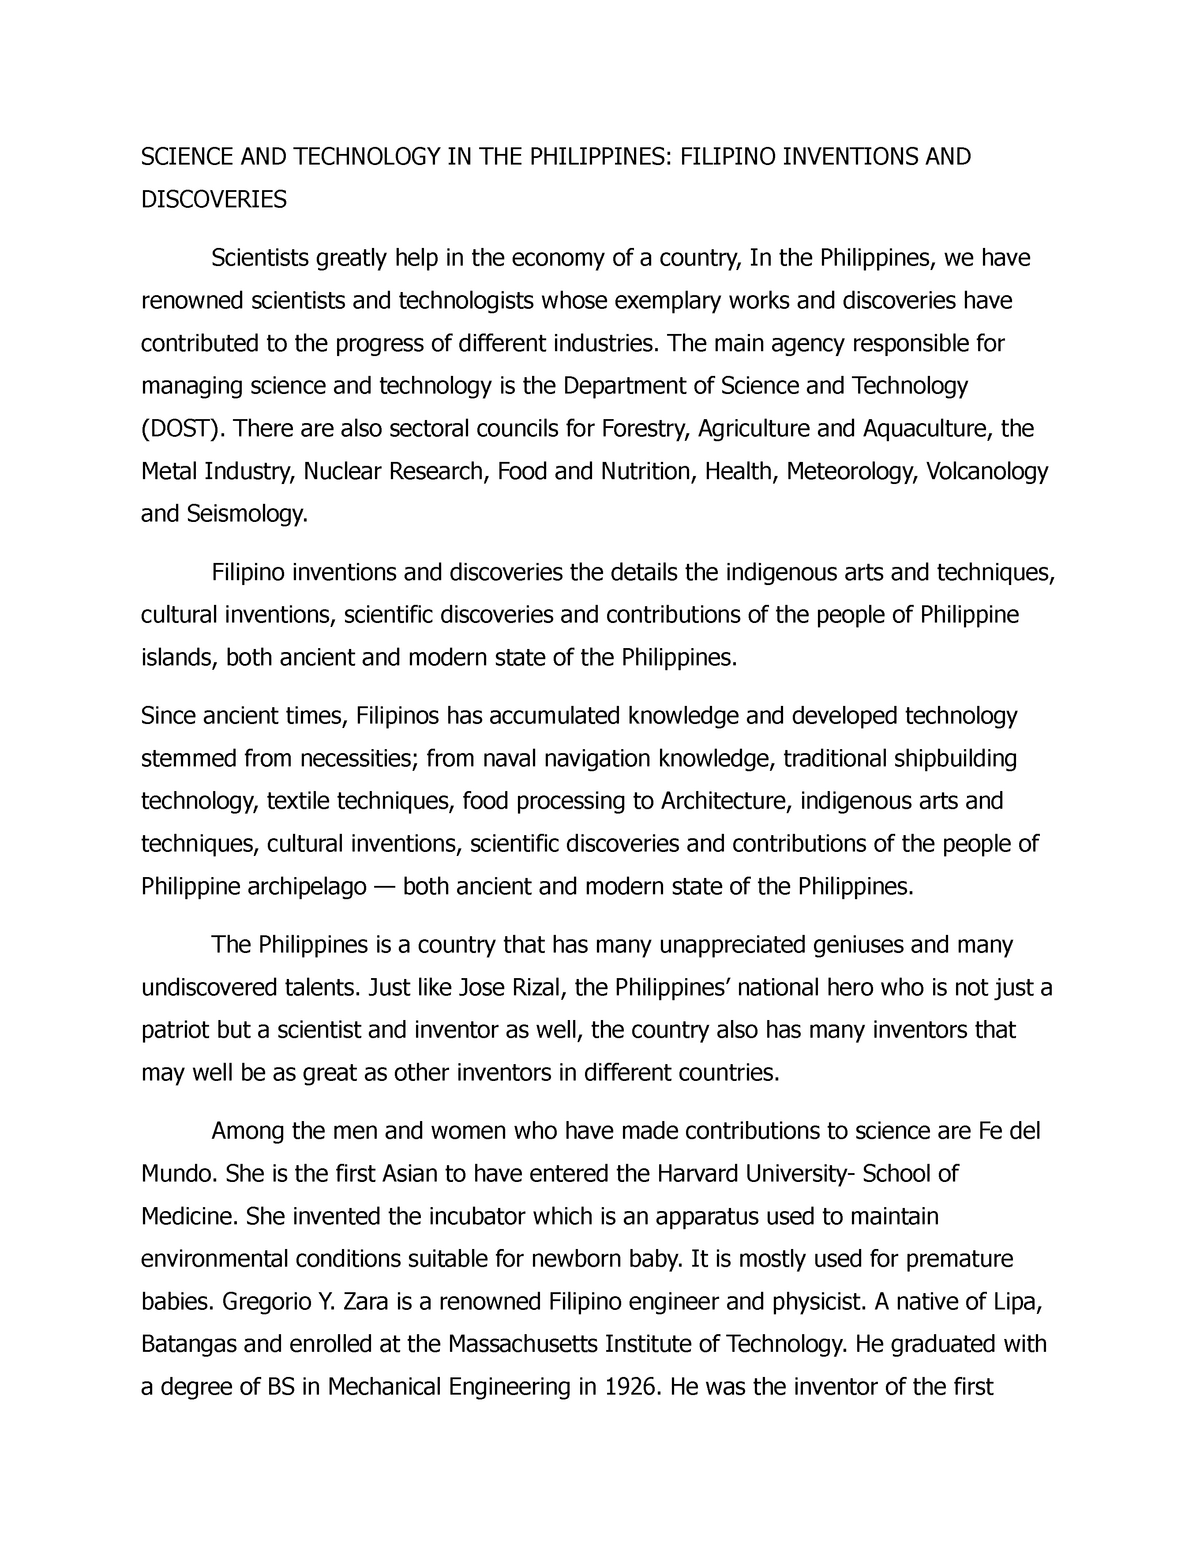 thesis about technology in the philippines